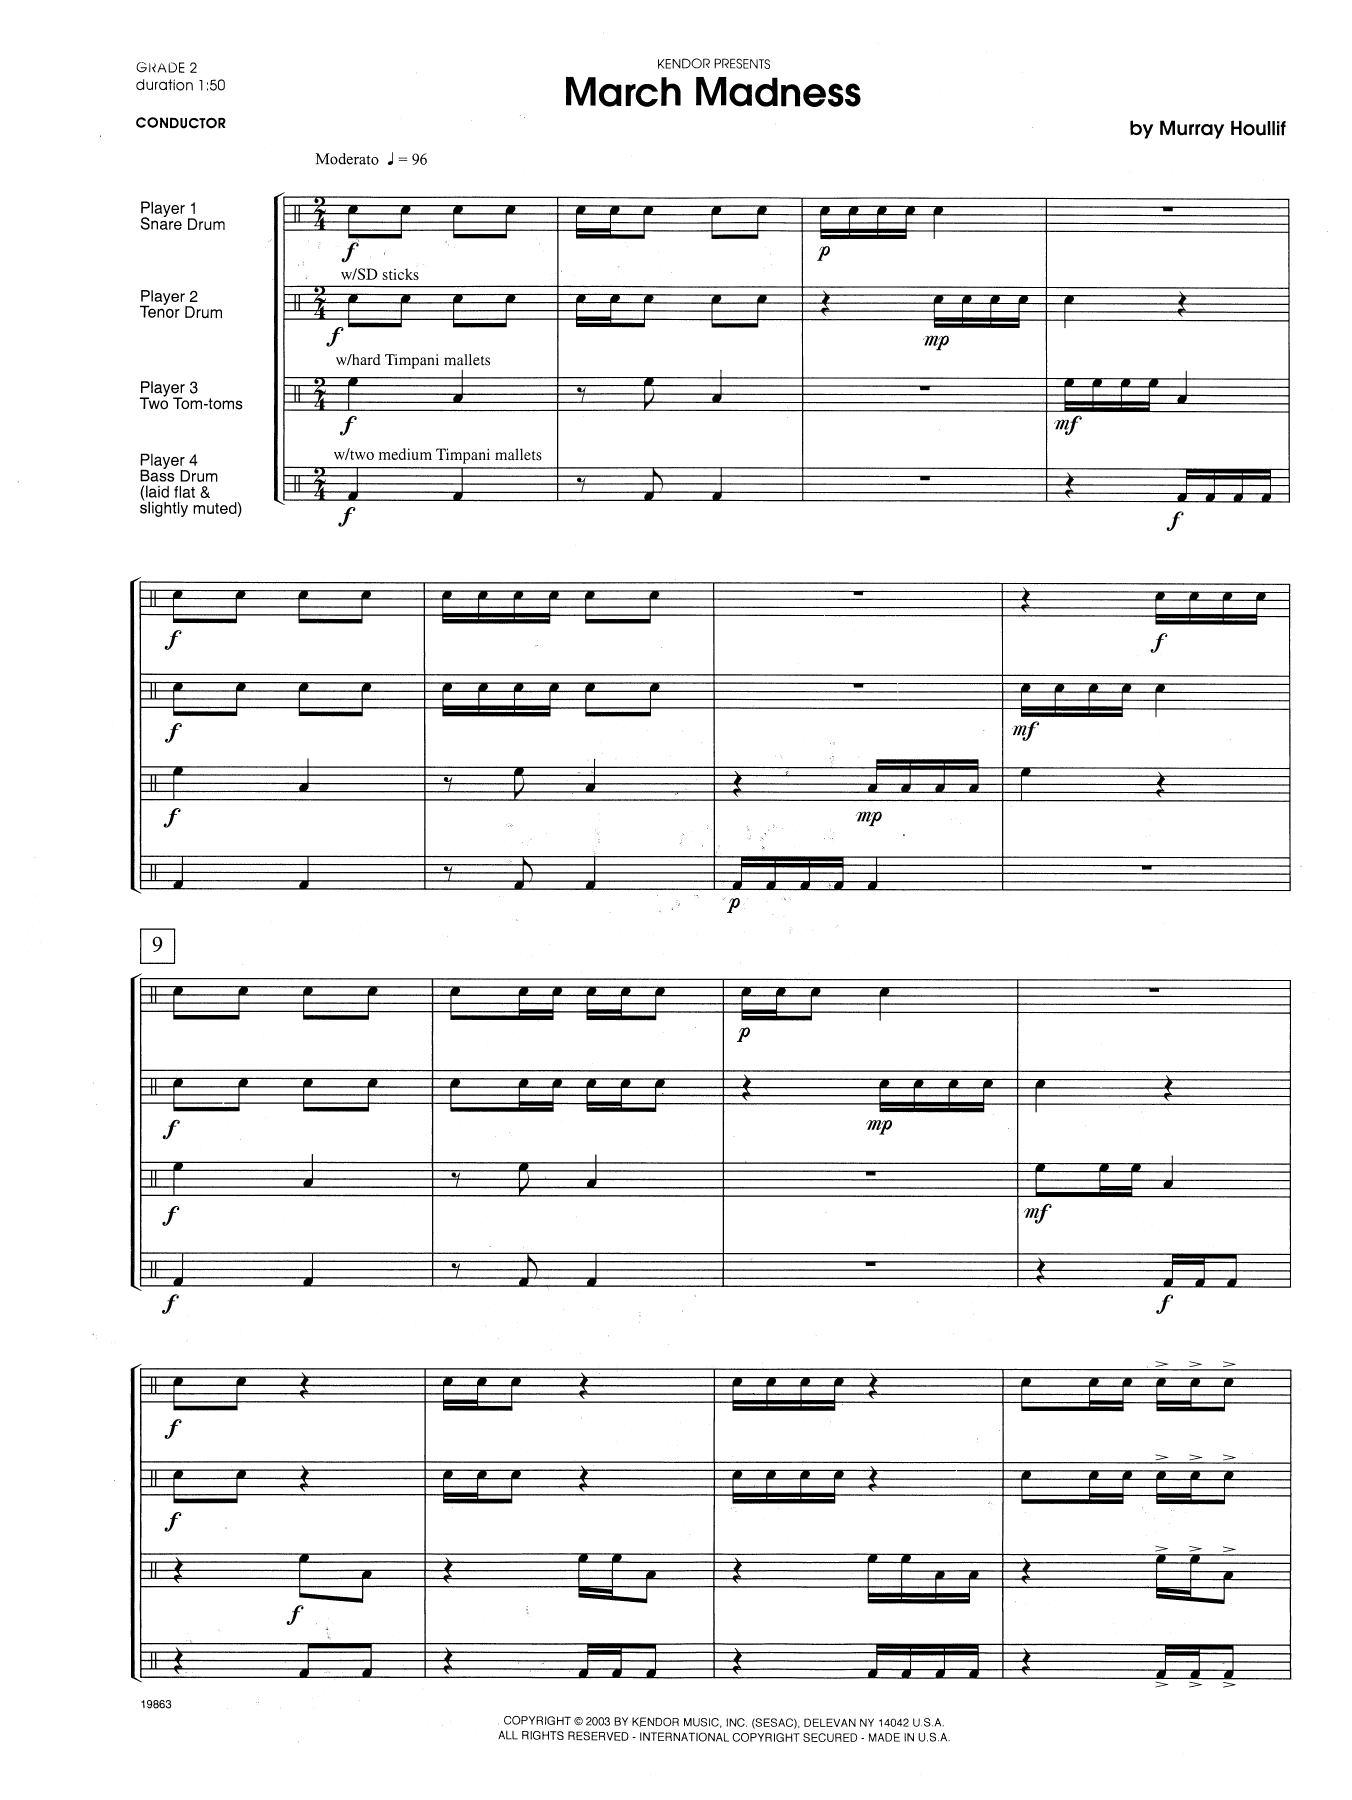 Download Murray Houllif March Madness - Full Score Sheet Music